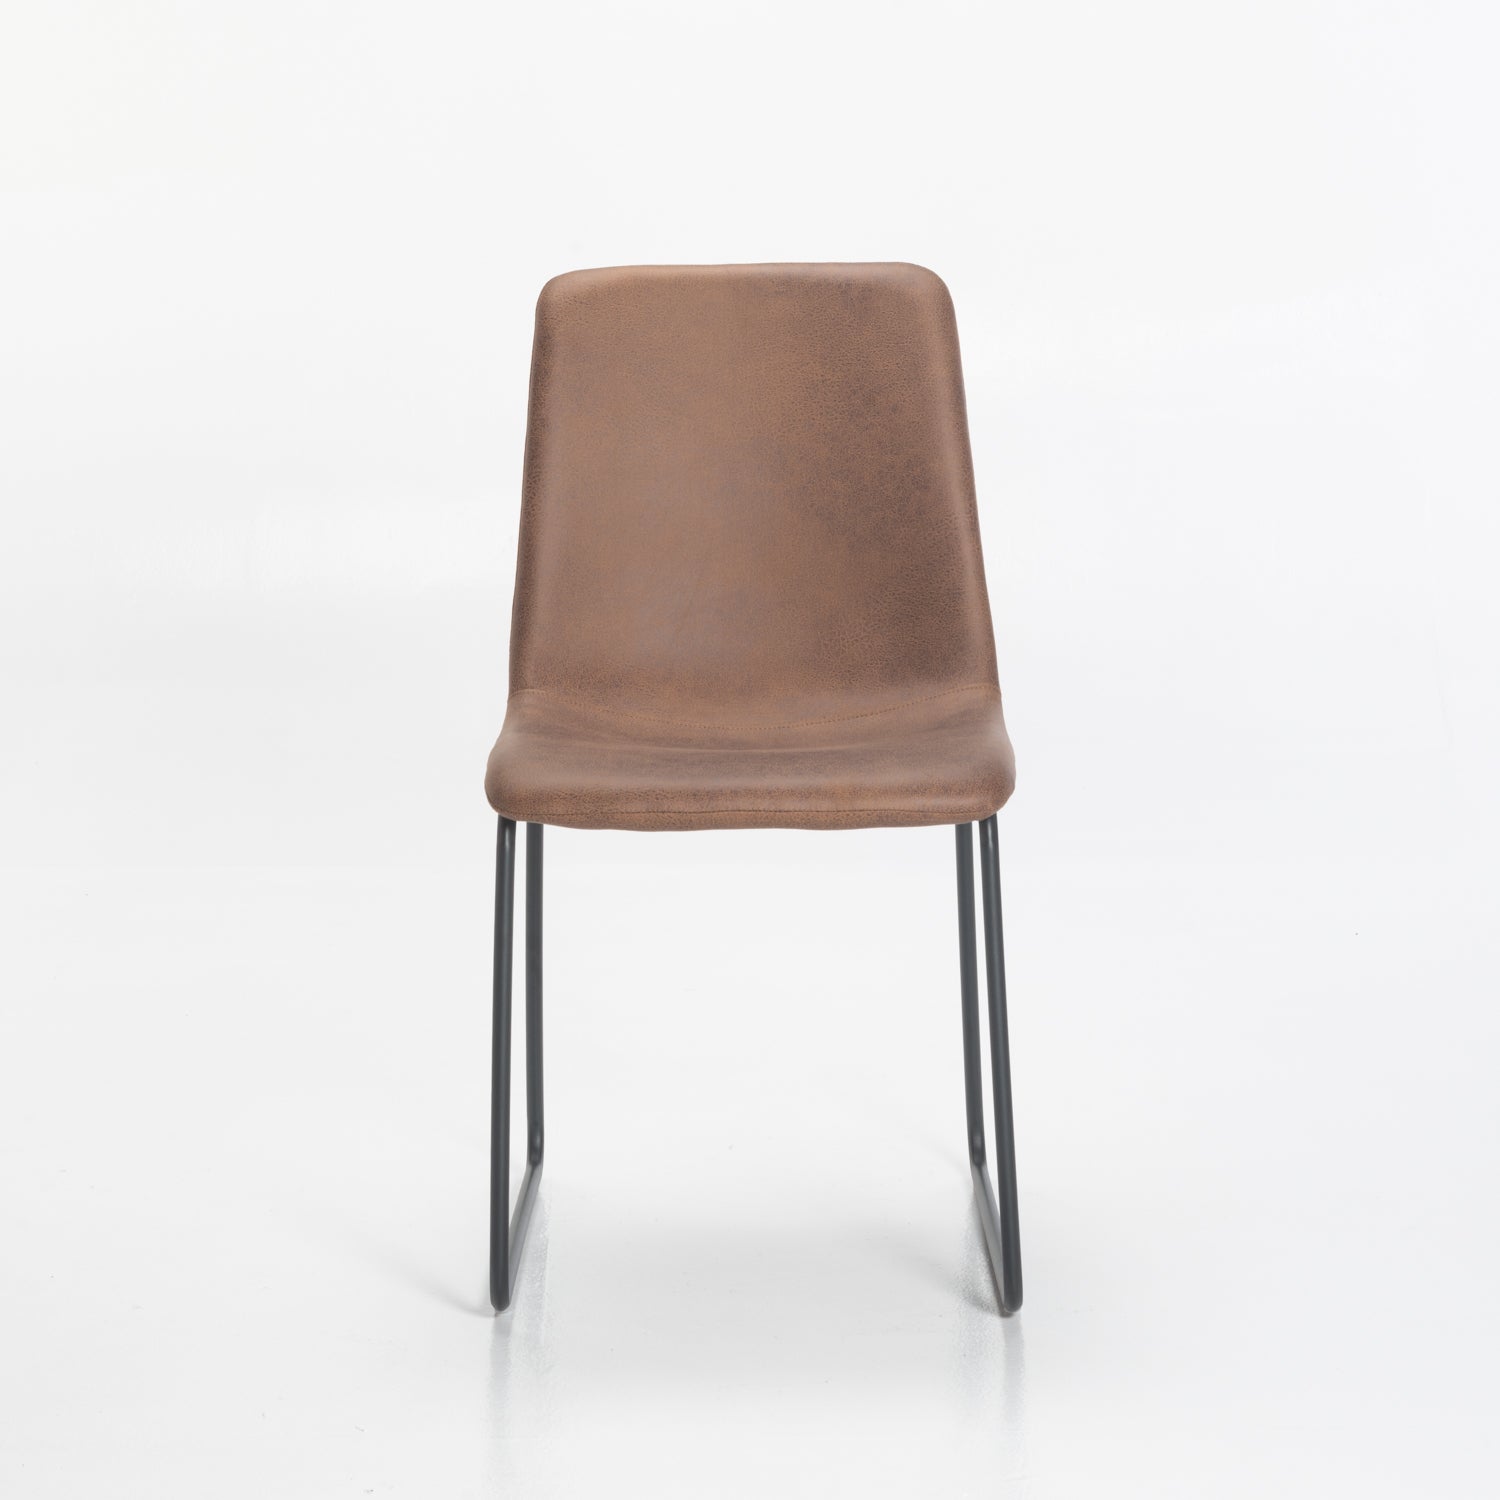 FINA FABRIC DINING CHAIR - BROWN